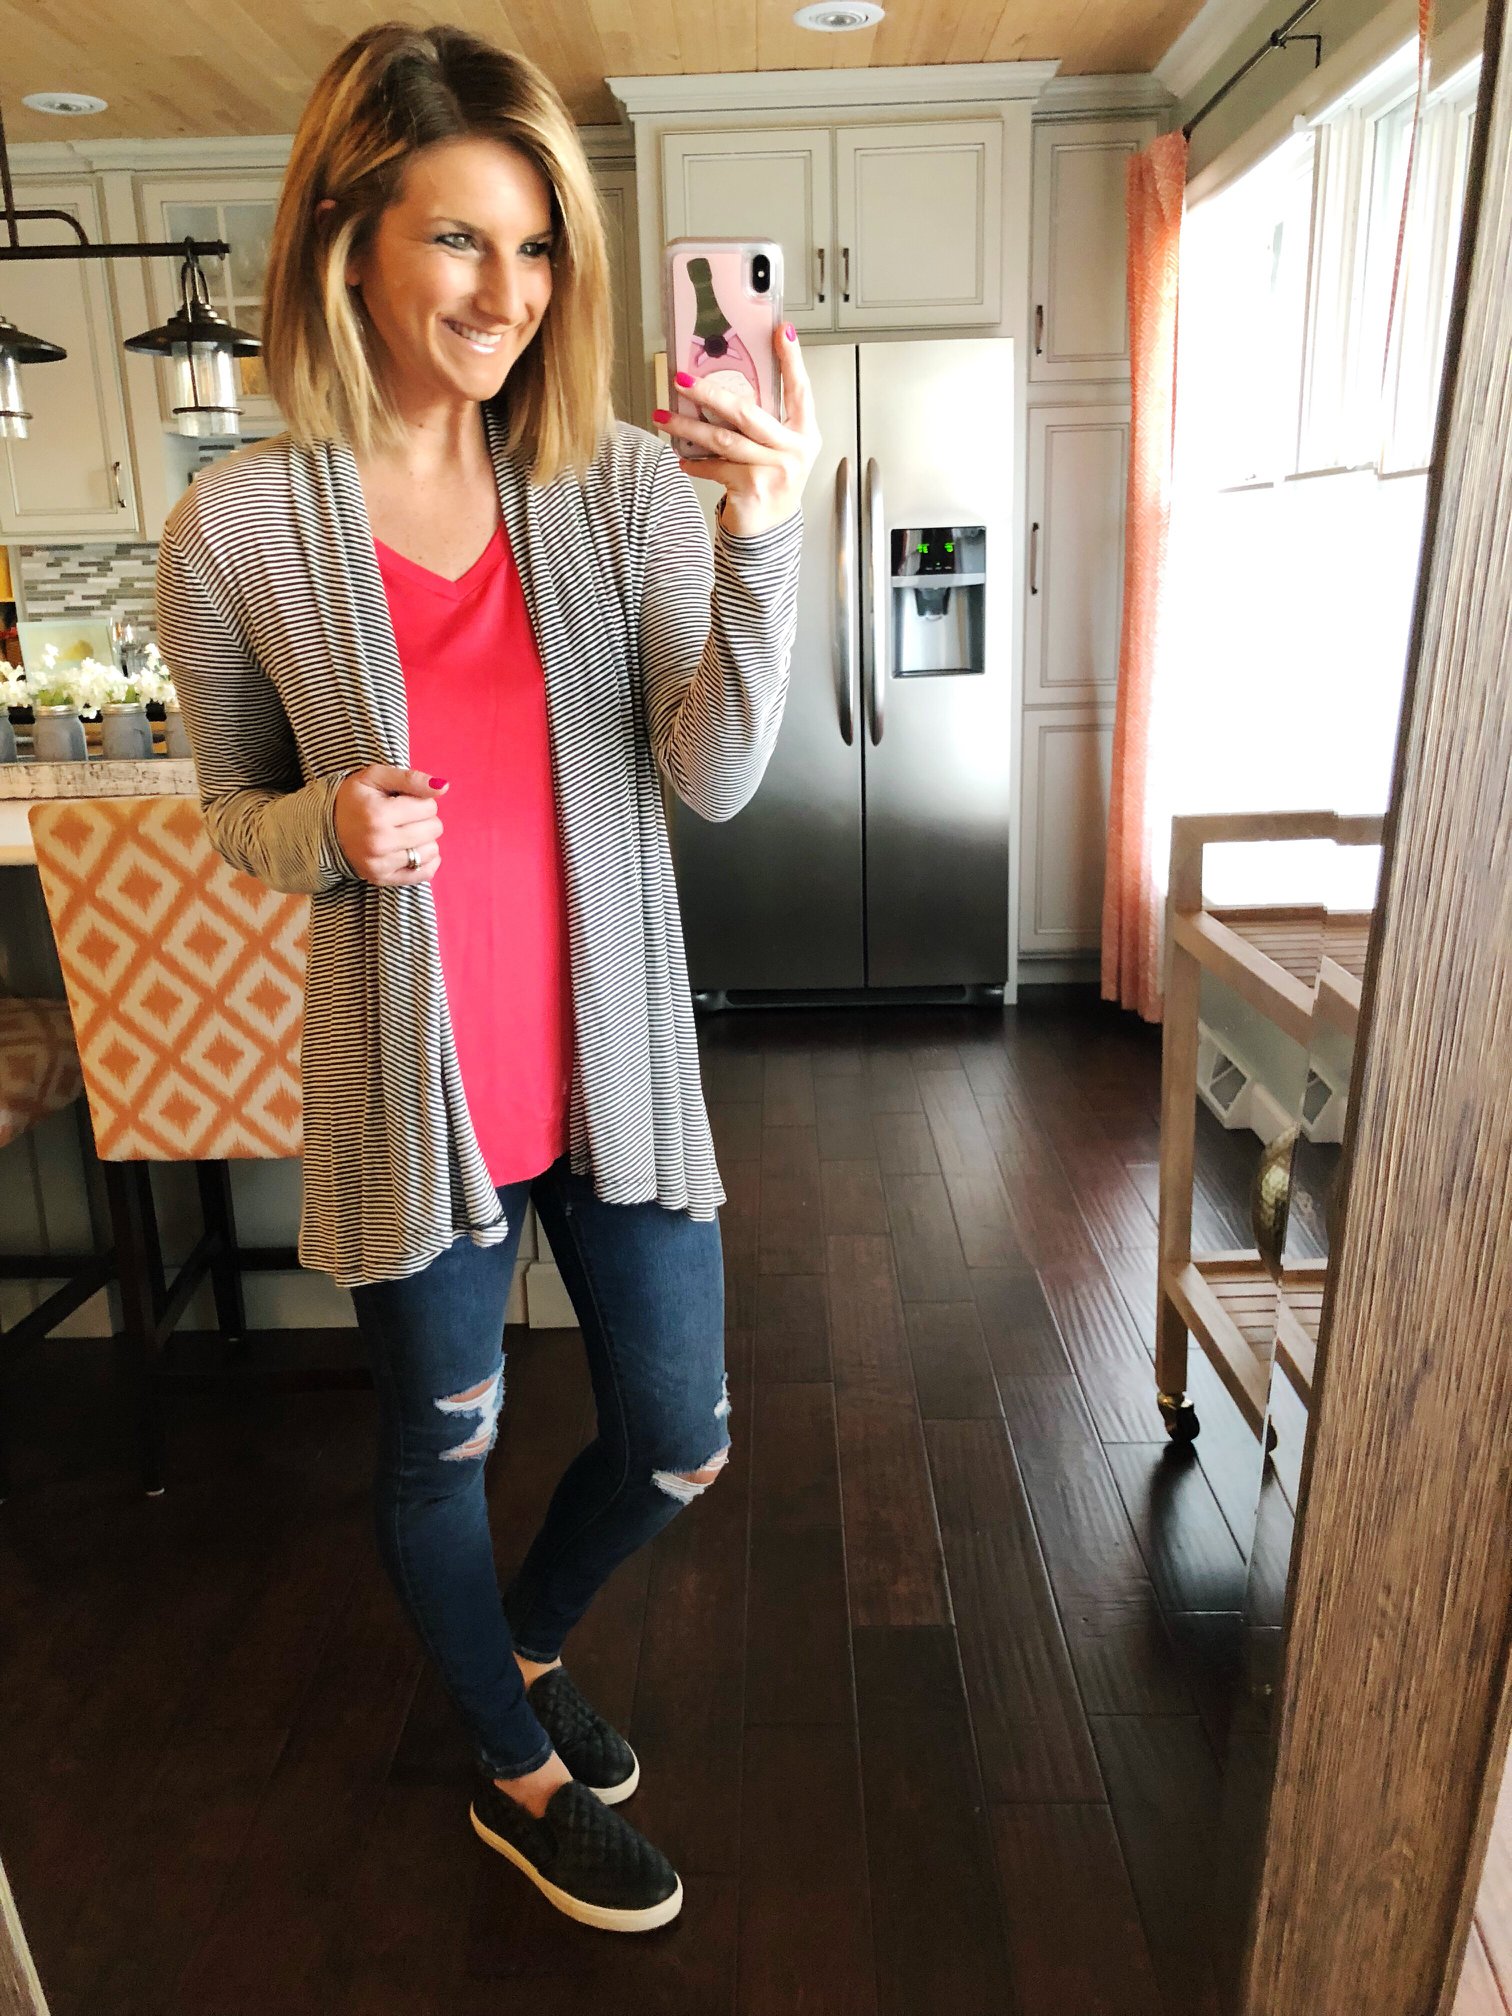 How to Style Pull On Jeans // V Neck Top + Pull On Destructed Jeans + Lightweight Cardigan + Slip On Sneakers // Spring Outfit